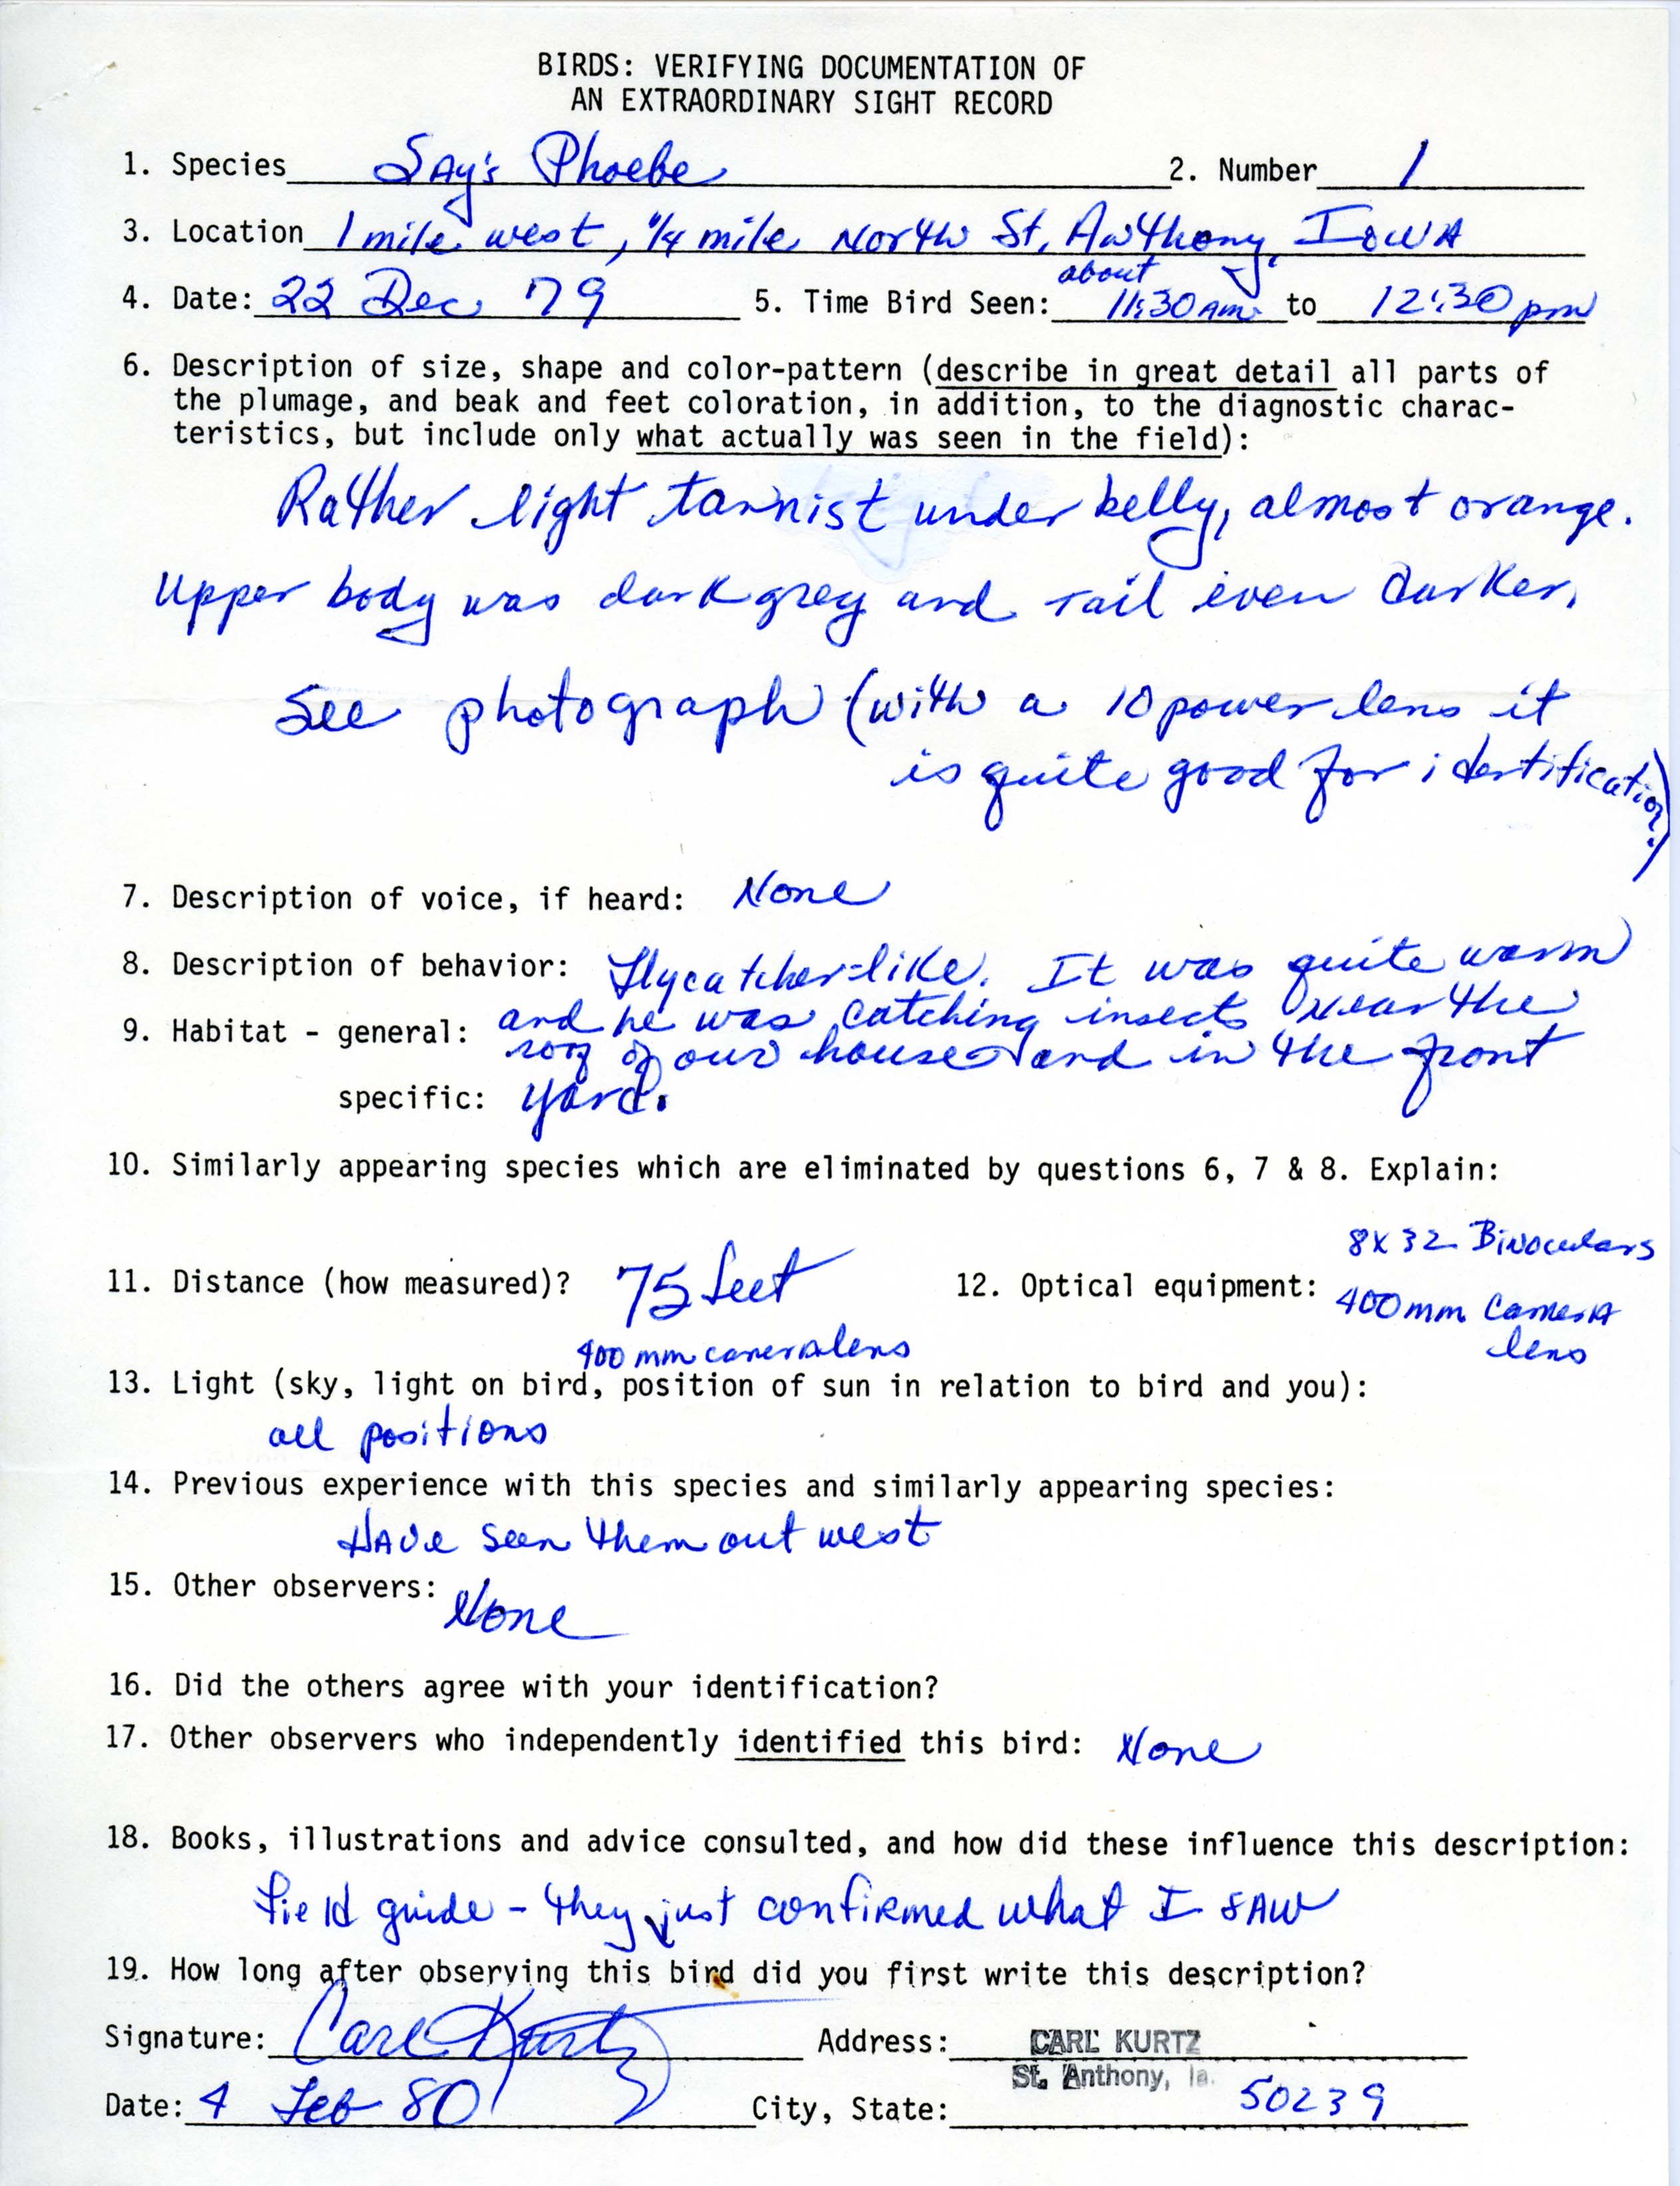 Rare bird documentation form for Say's Phoebe west and north of St. Anthony, 1979